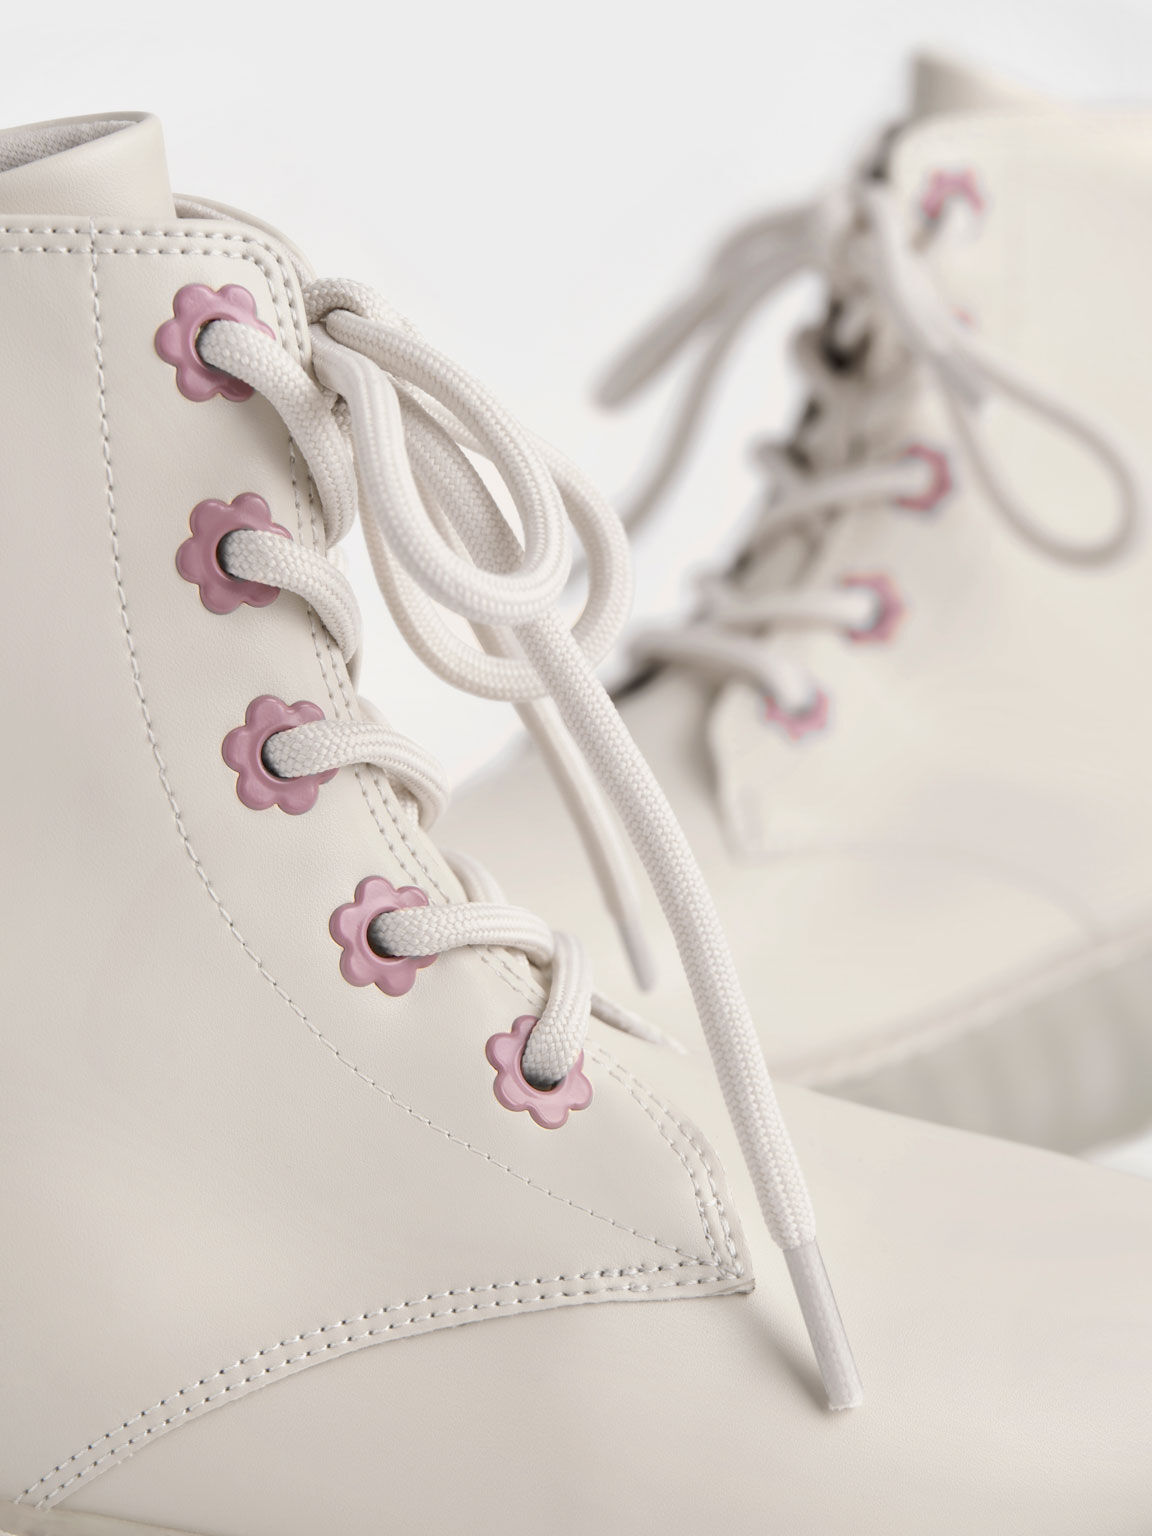 Girls' Patent Lace-Up Boots, Chalk, hi-res